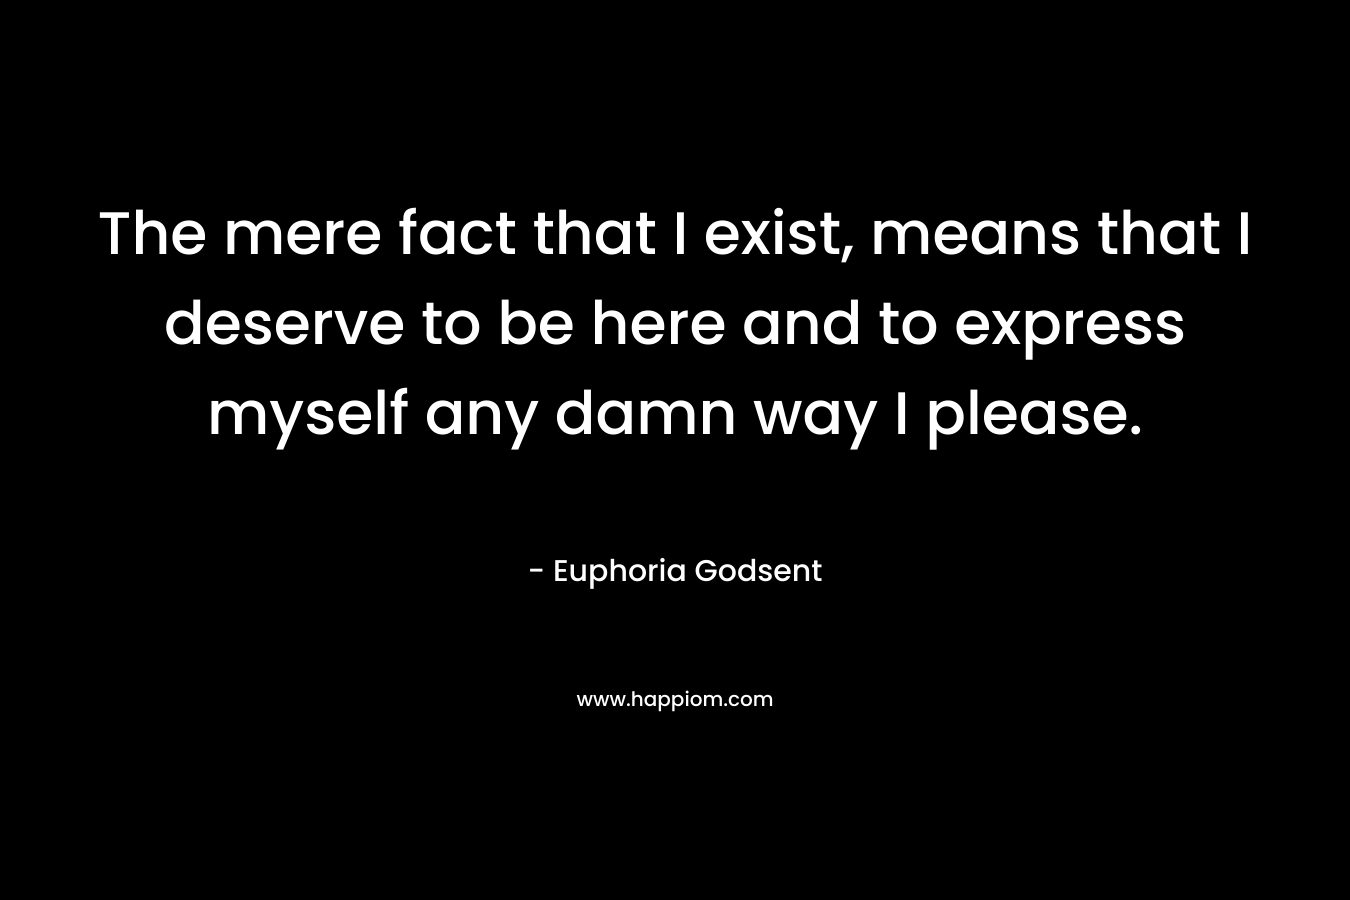 The mere fact that I exist, means that I deserve to be here and to express myself any damn way I please.